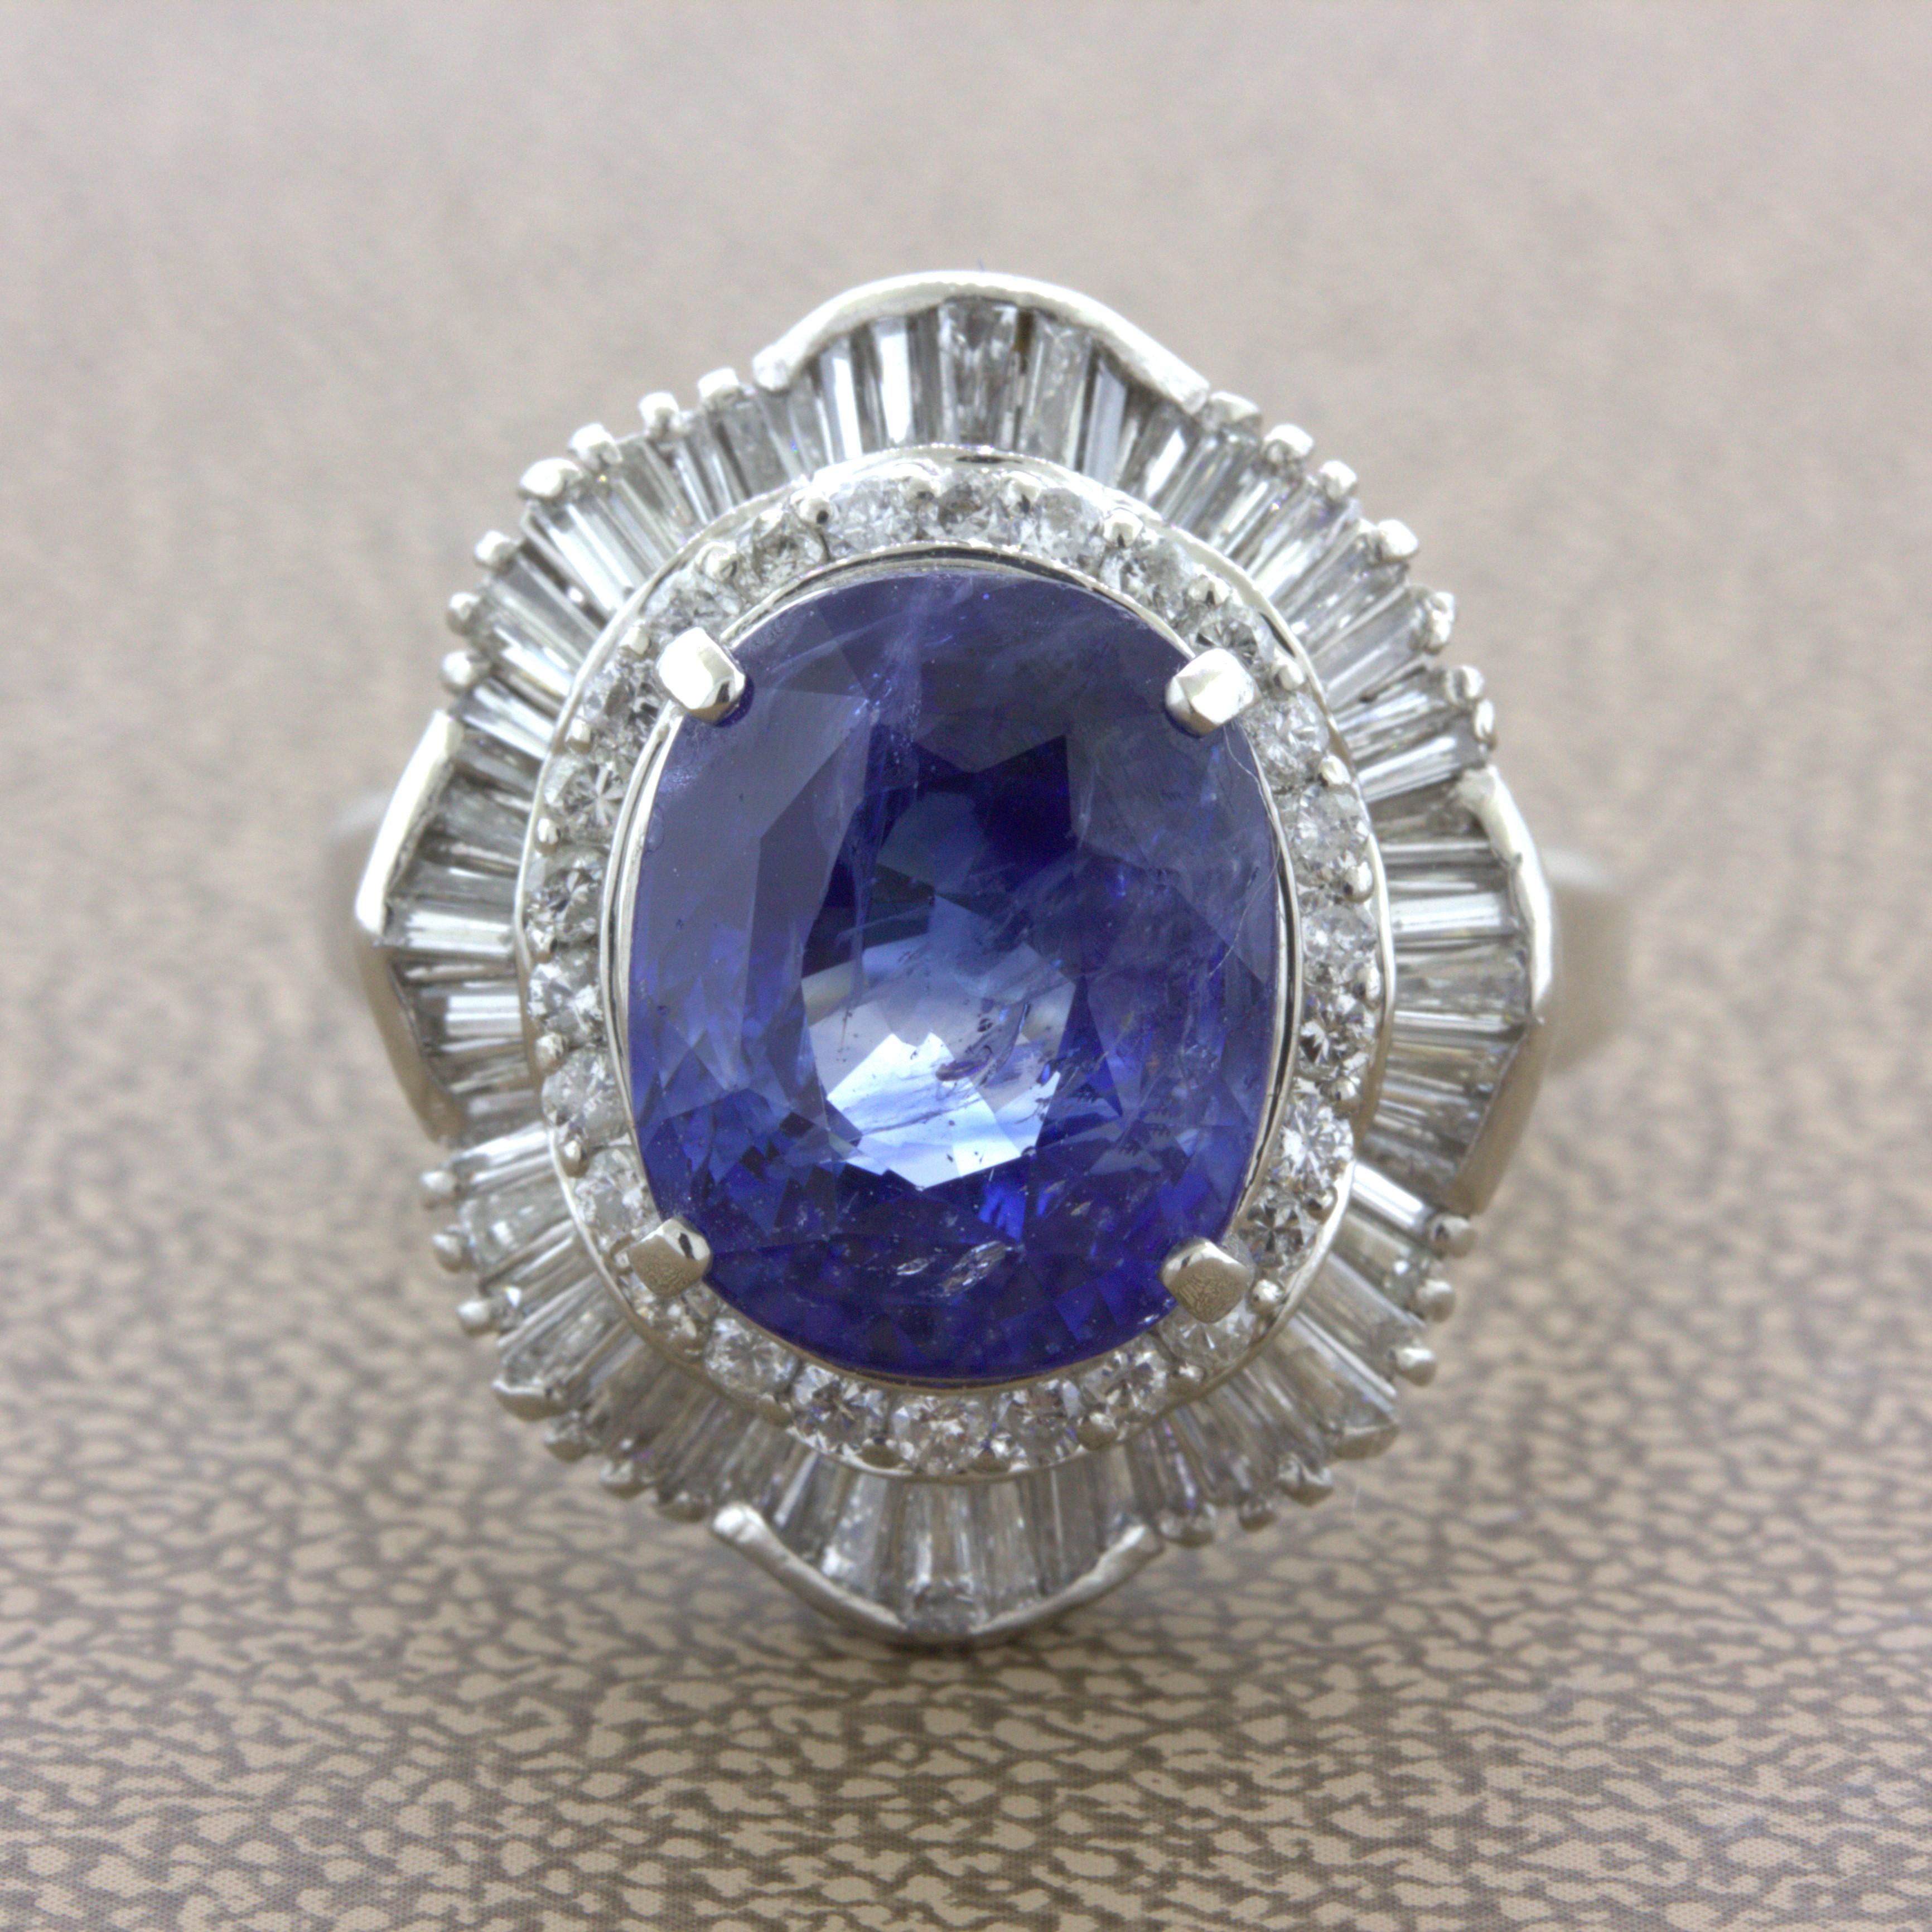 A bright and beautiful blue sapphire takes center stage. It weighs 7.94 carats and has great color with excellent light return. It is complemented by 1.20 carats of round brilliant and baguette-cut diamonds set around the sapphire in a stylish